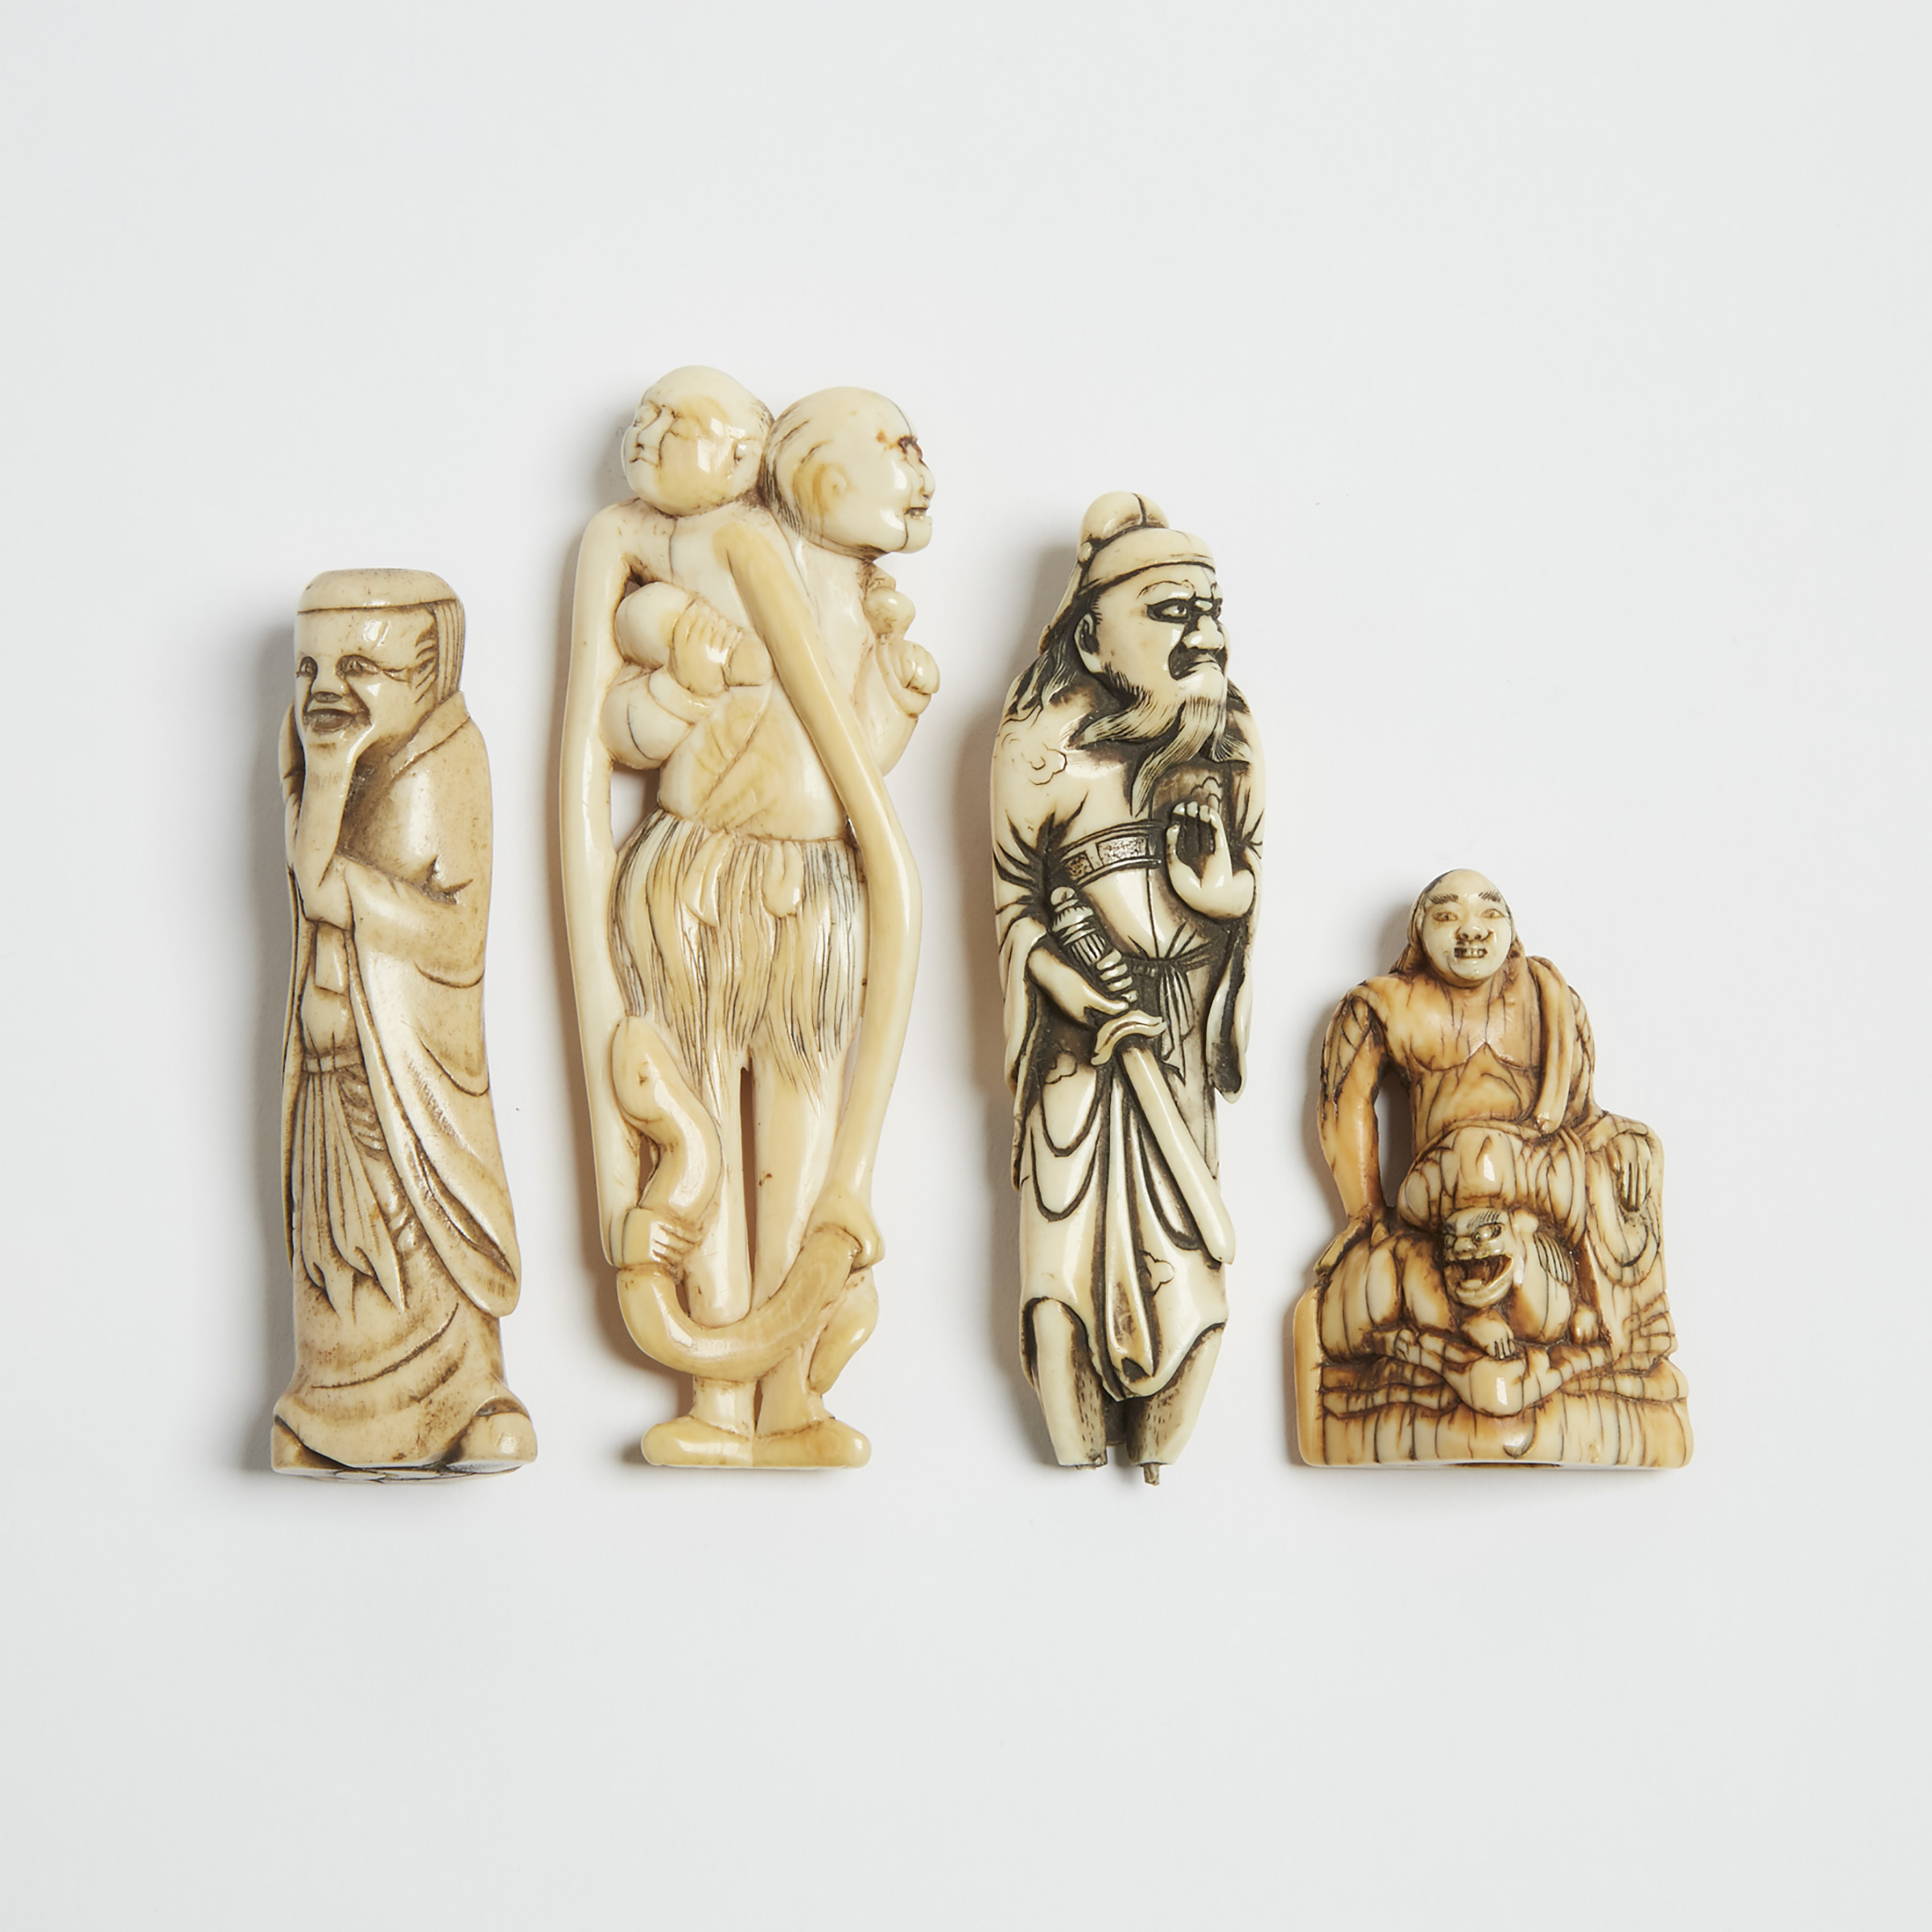 A Group of Four Ivory and Antler Netsuke, 18th/19th Century